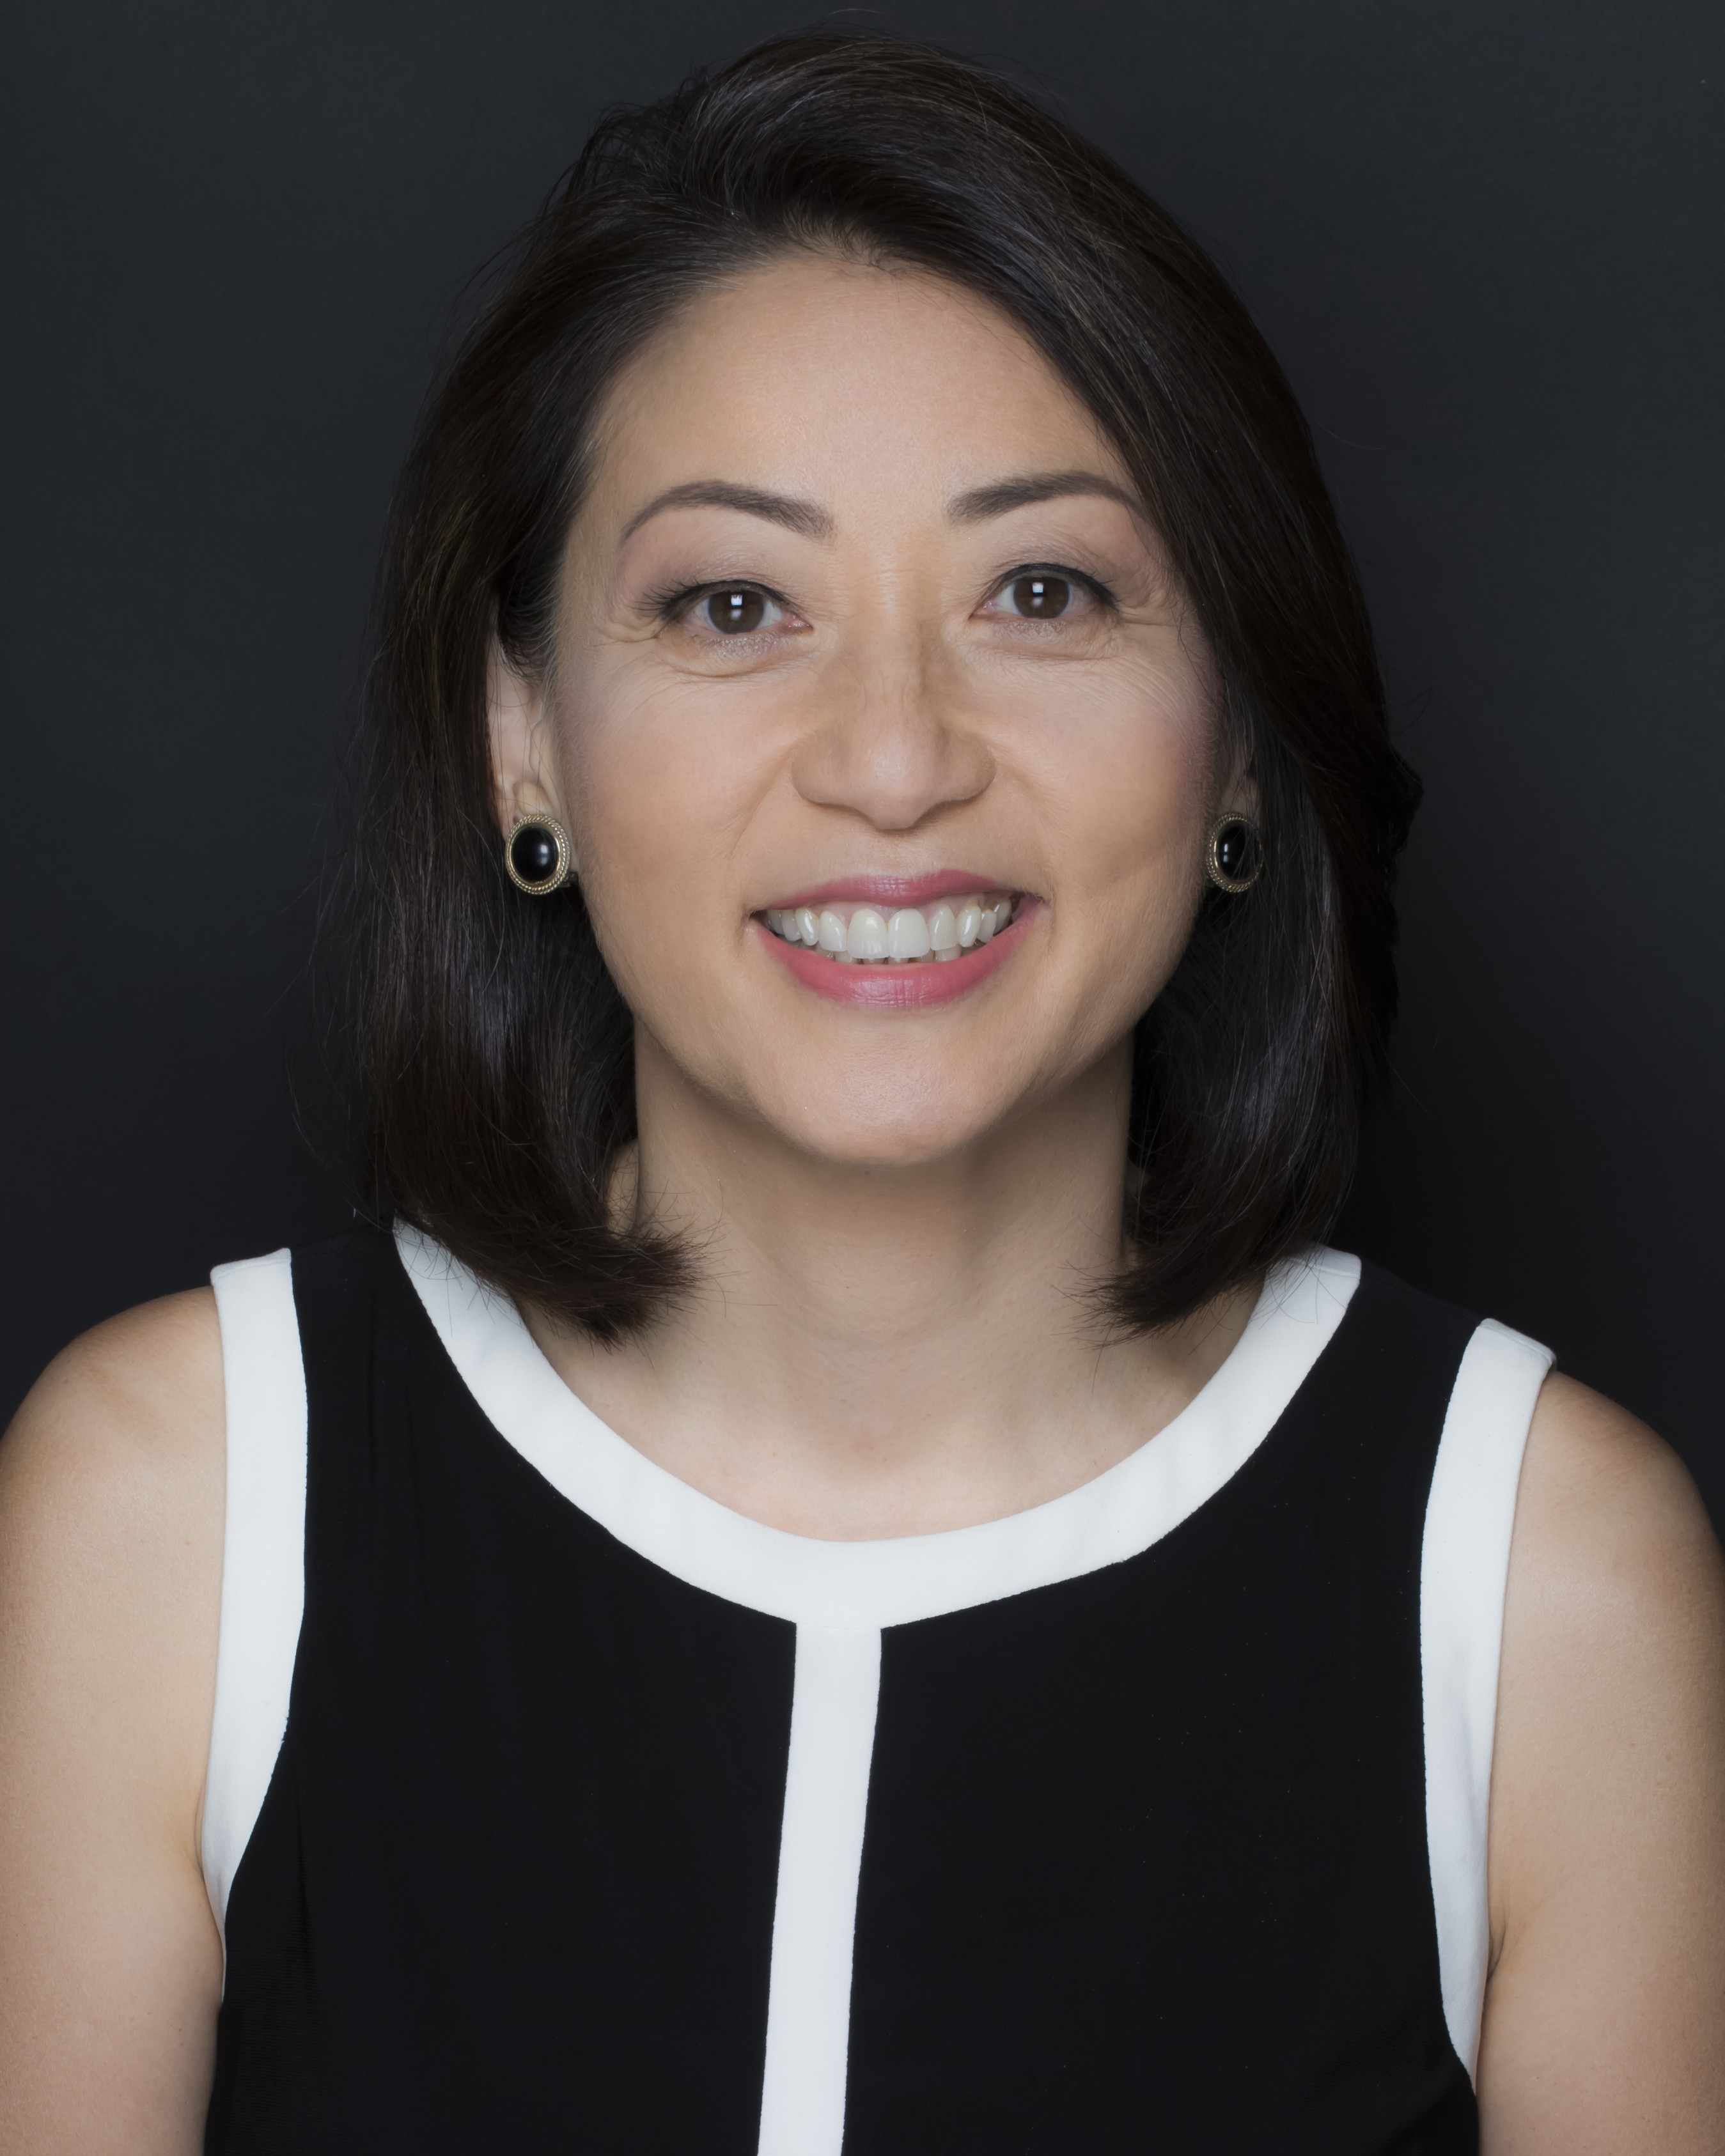 Rosaline Chow Koo, founder and CEO